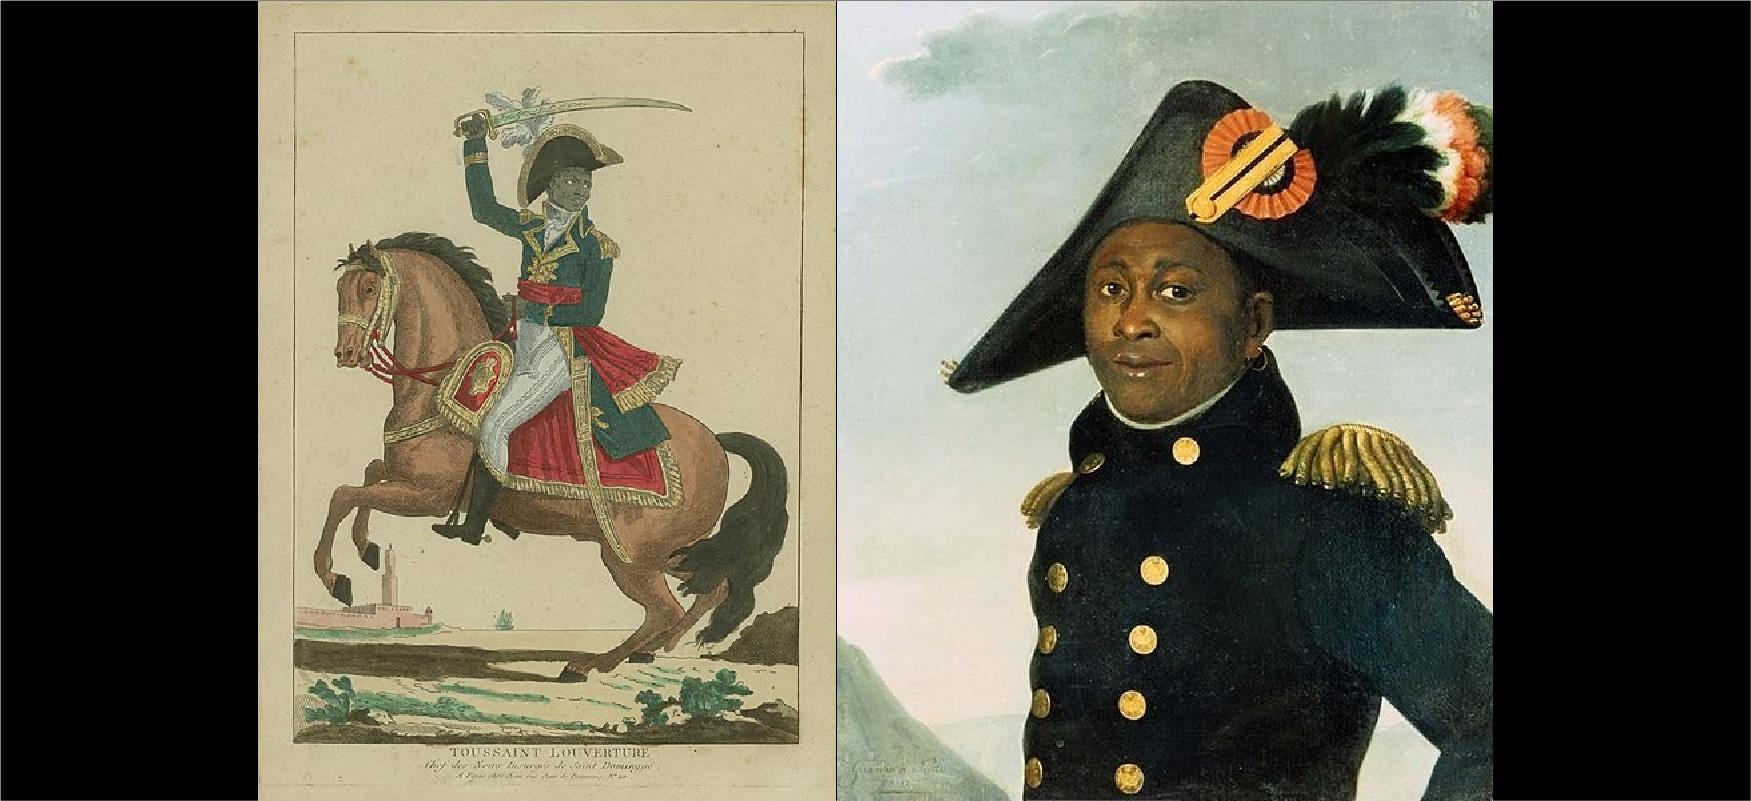 Two portraits of Toussaint Louverture. The left is him on a horse in military uniform with a sword raised. The right is a close up portrait of him standing, also in military uniform.